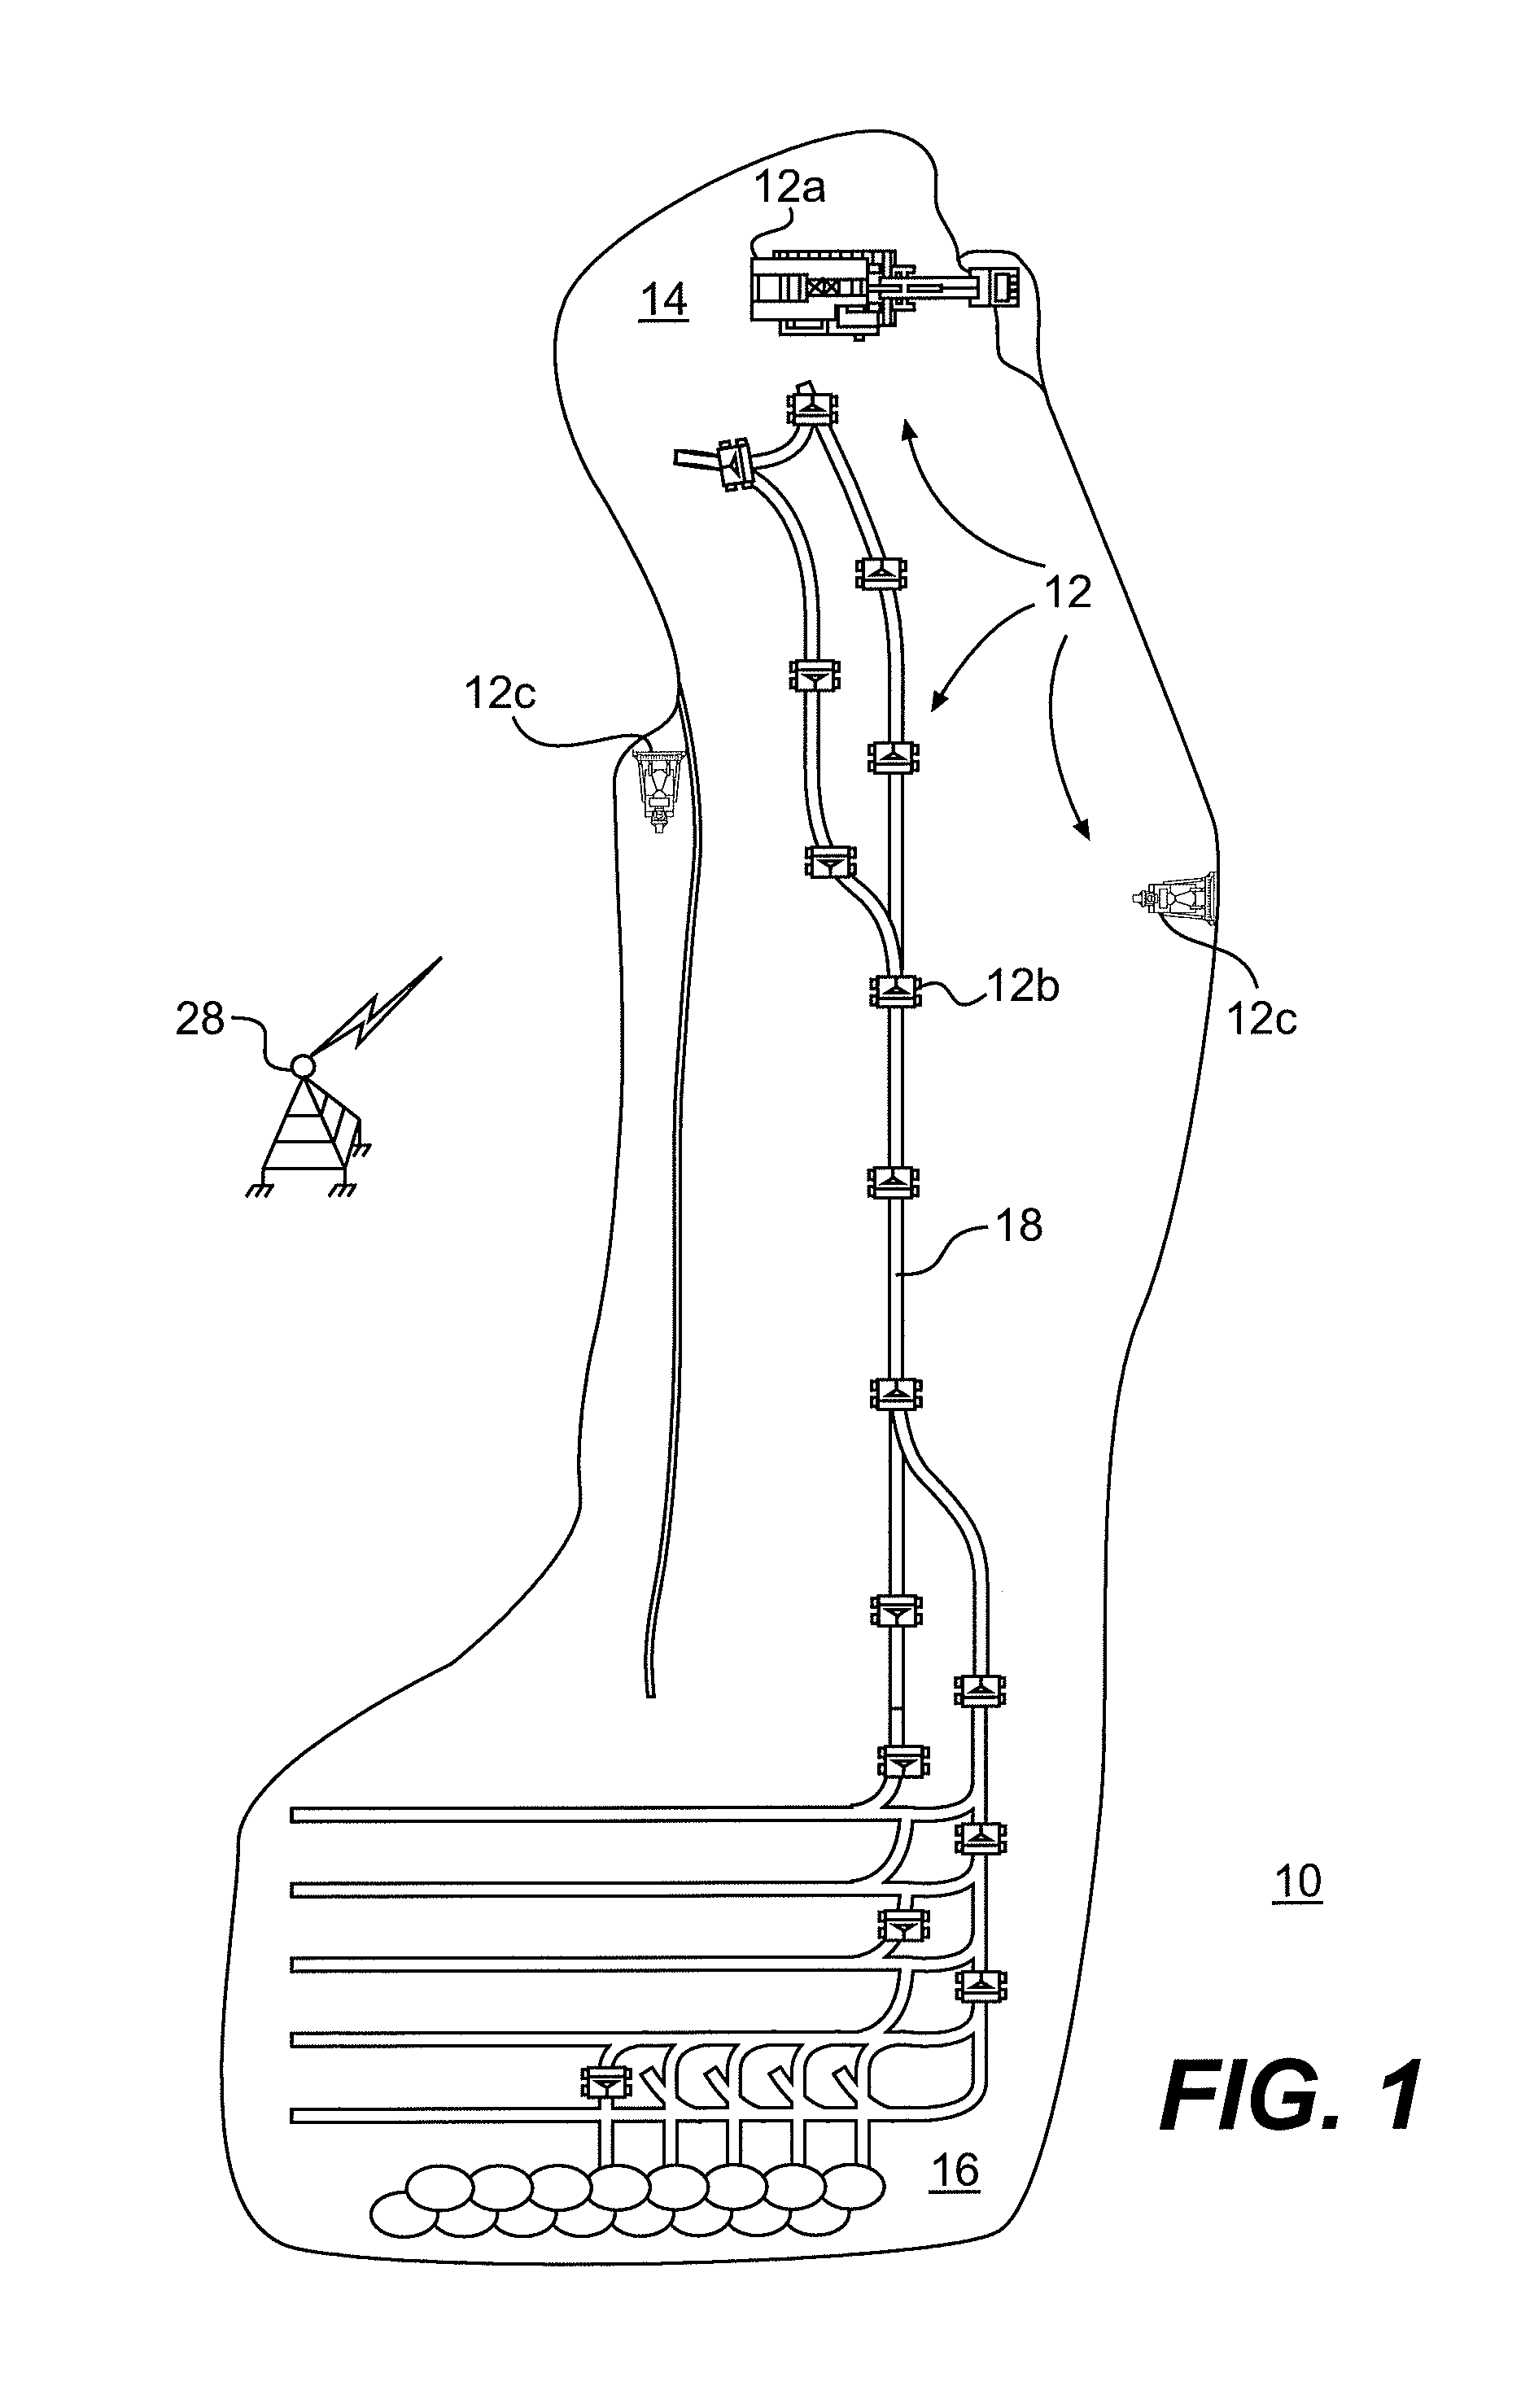 System for autonomous path planning and machine control